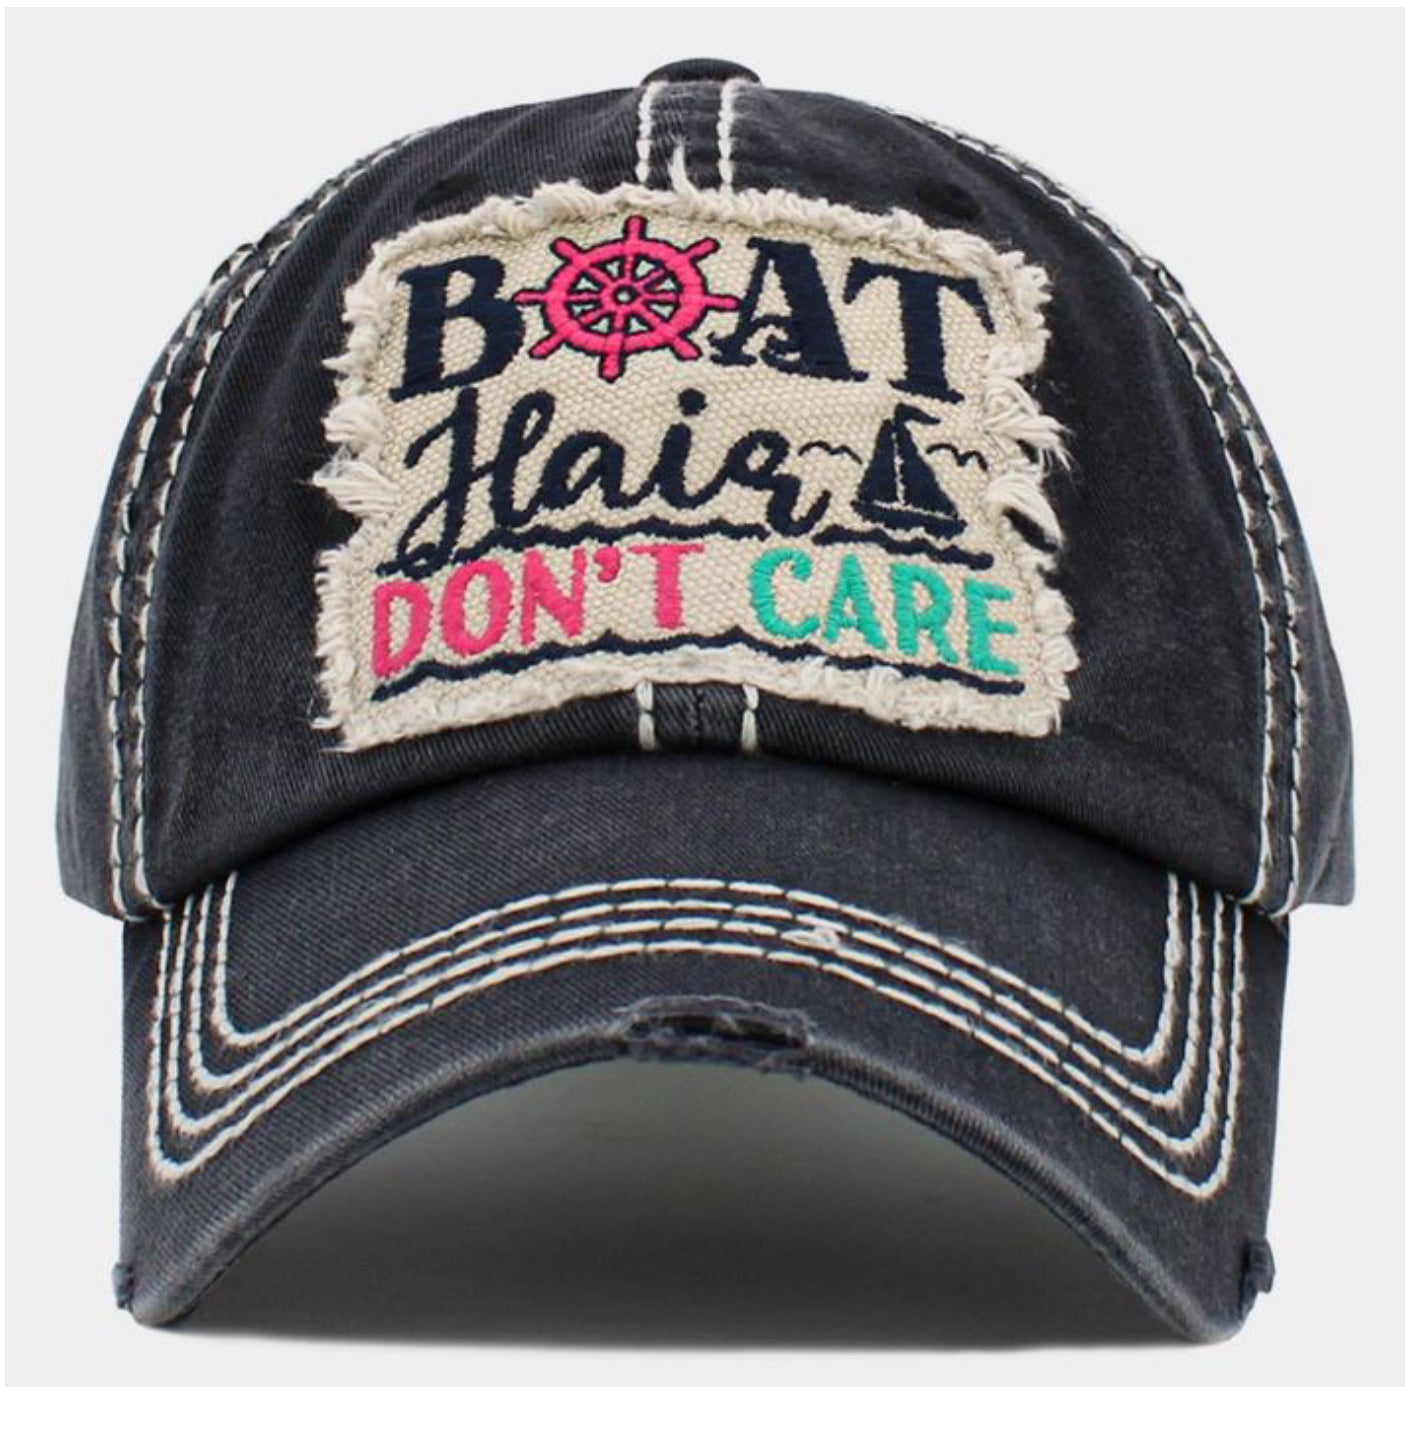 Boat hair don’t care hat